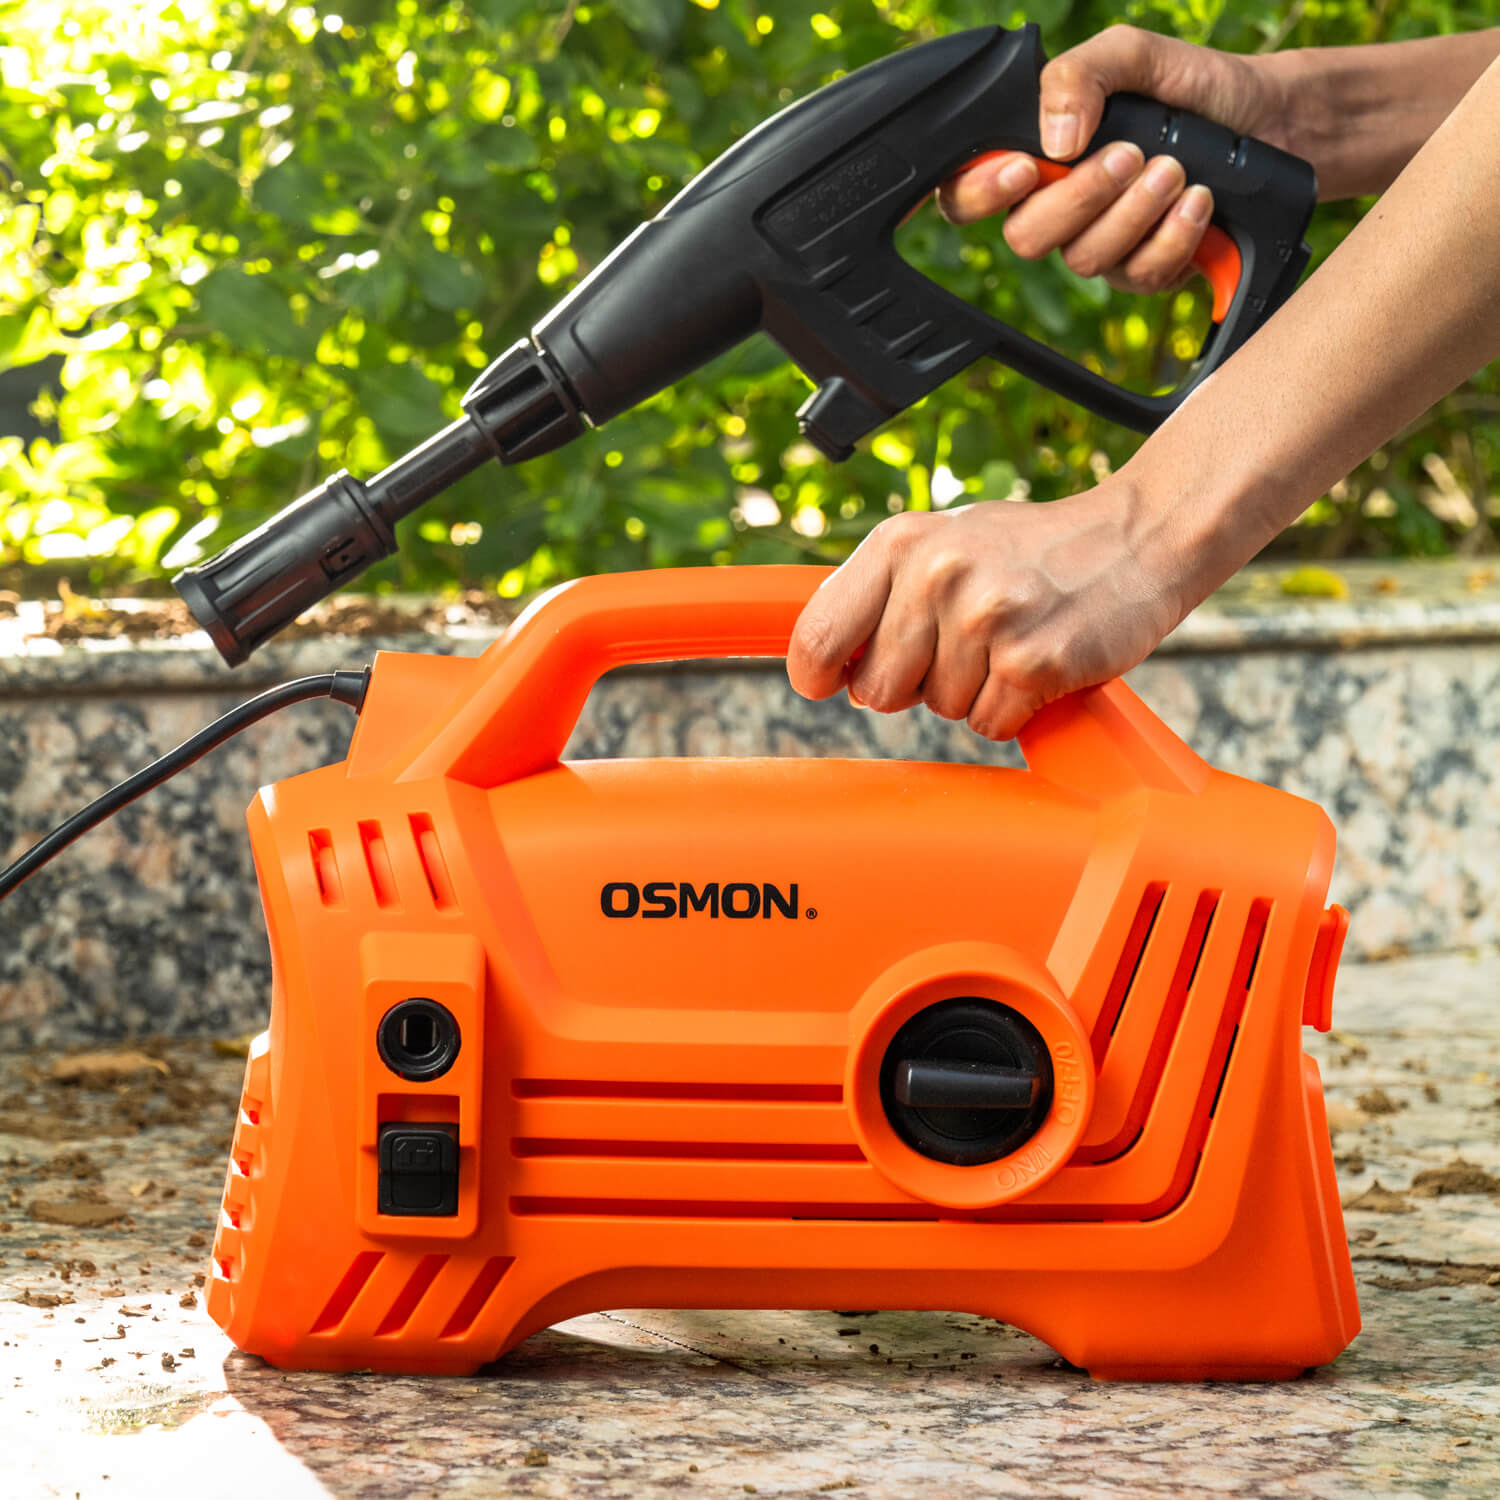 The image showcases the OS PW120 Flow High Pressure Washer, designed for efficient cleaning of cars, bikes, and homes. The pressure washer is featured in a vibrant orange color, adding a touch of style to your cleaning routine with its Pressure gun in black colour